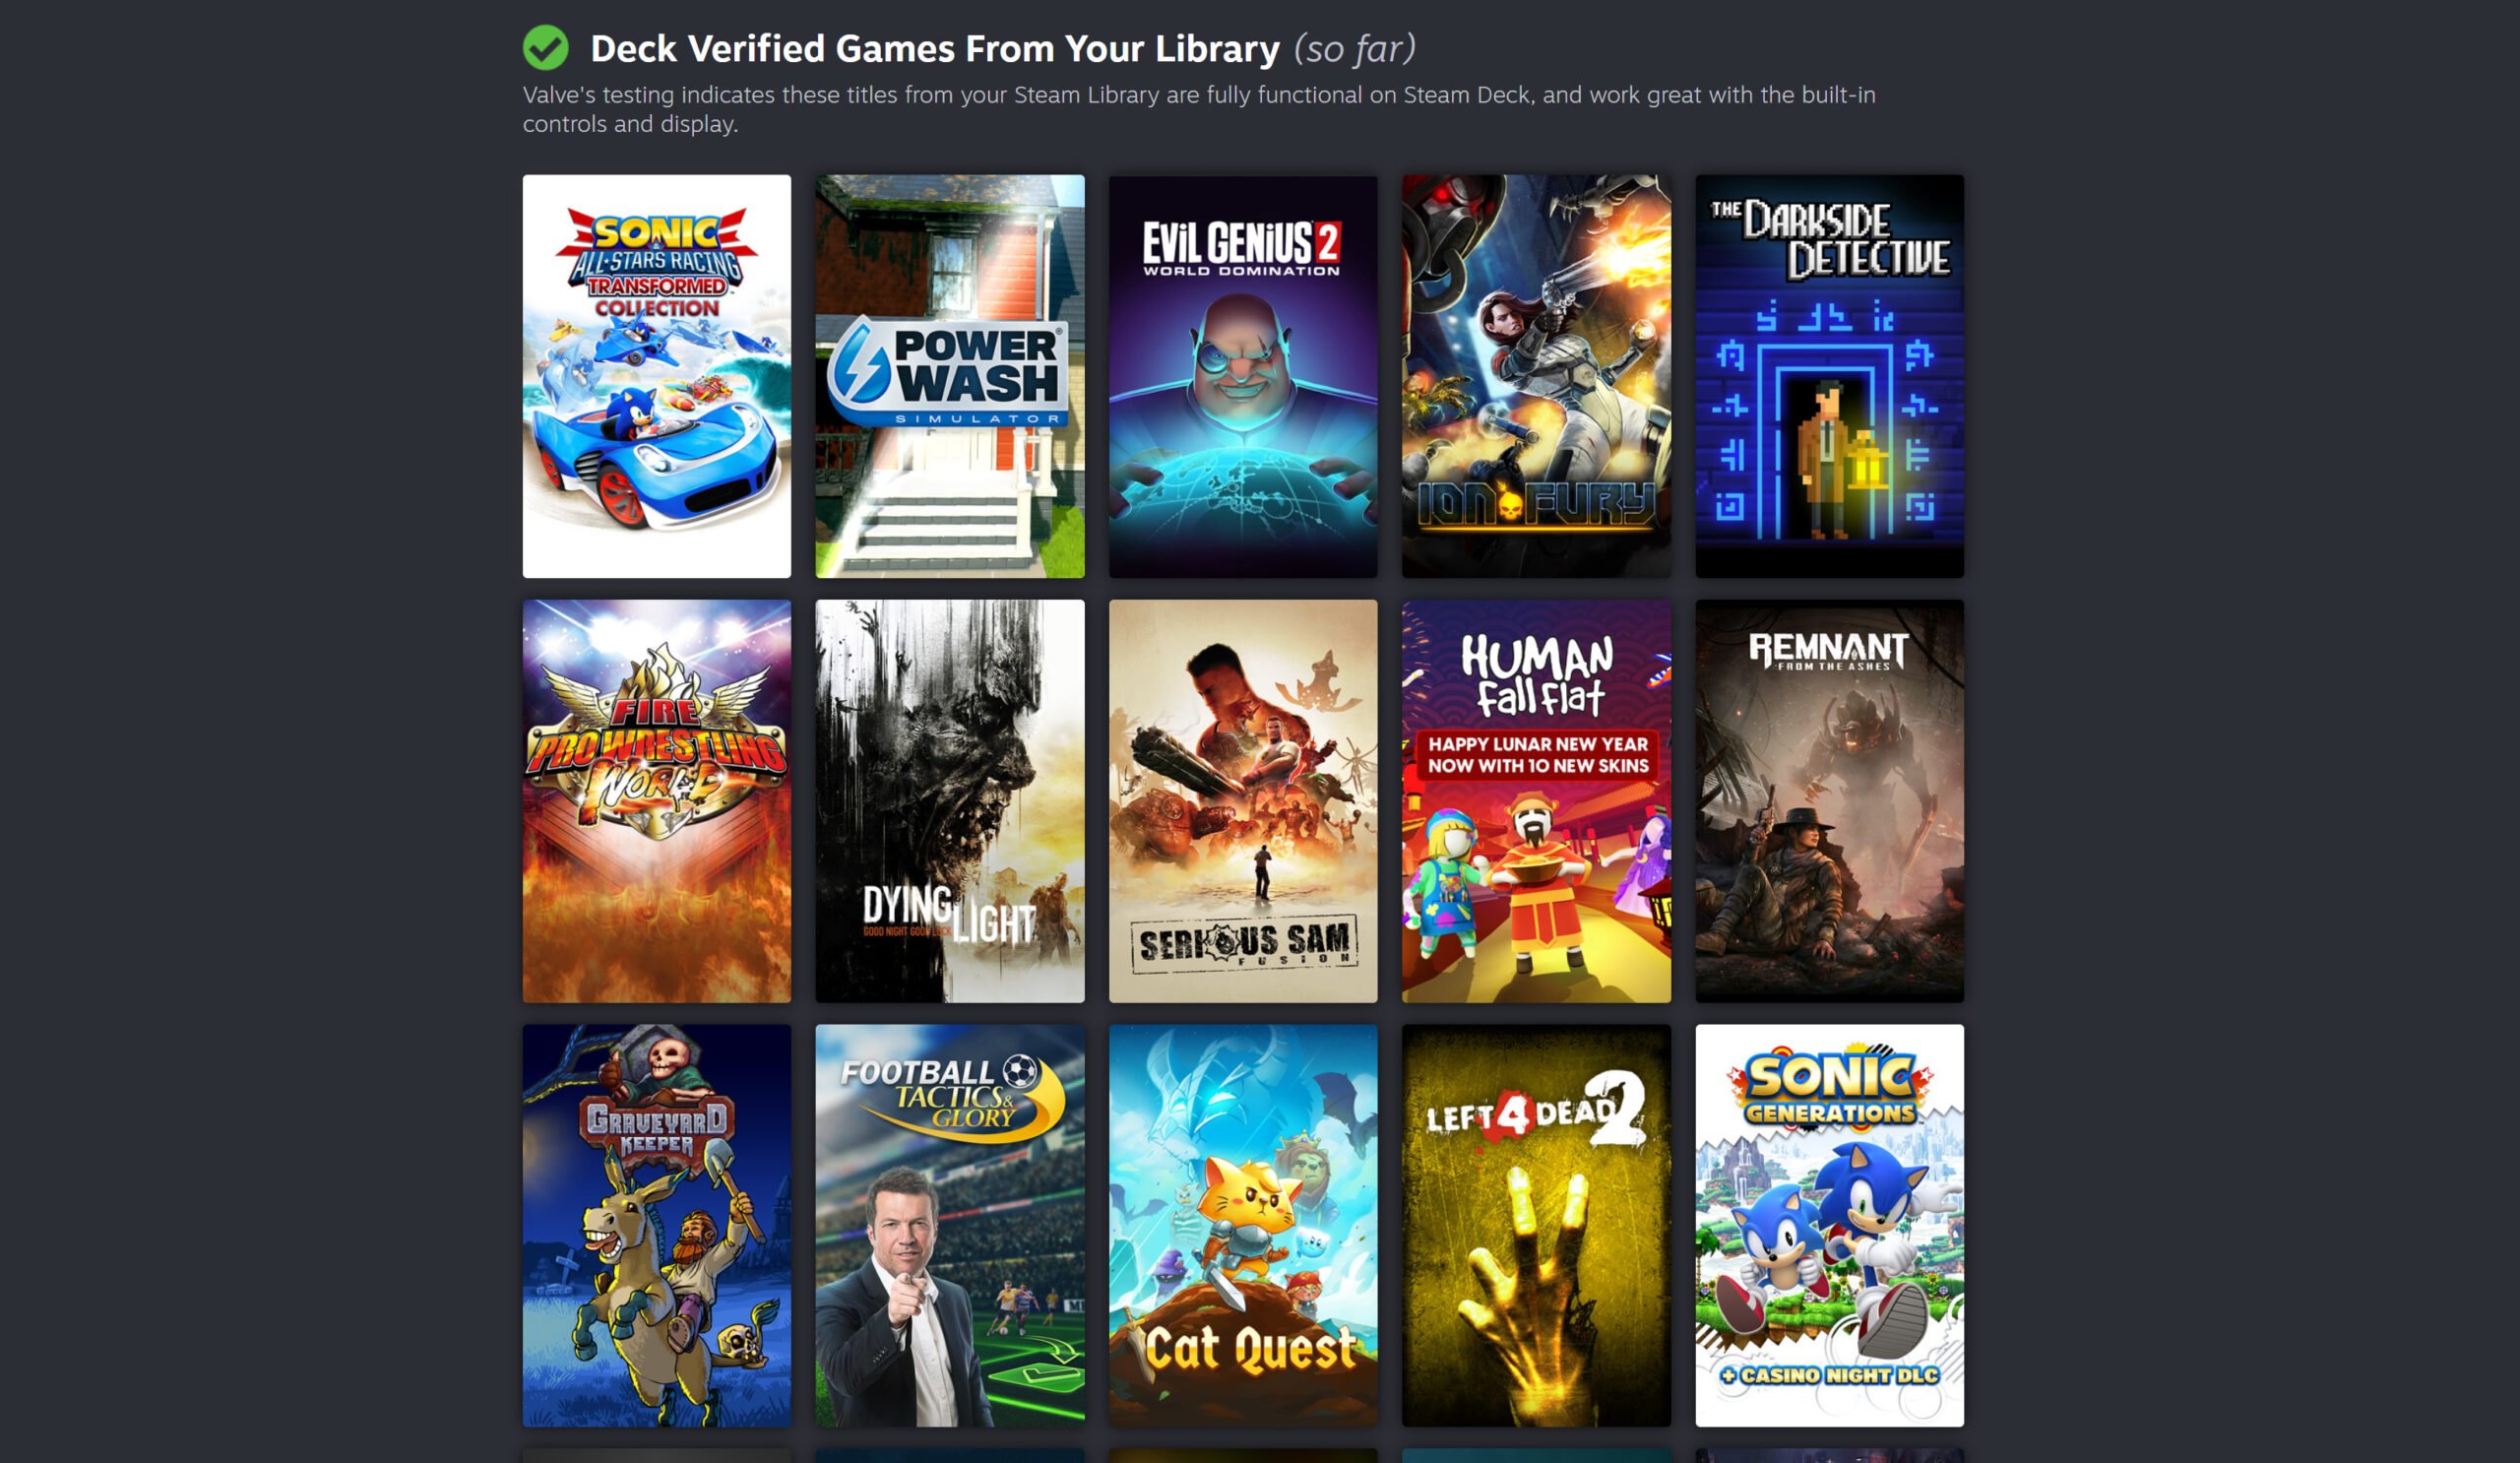 Steam: Everything You Need to Know About the Video Game